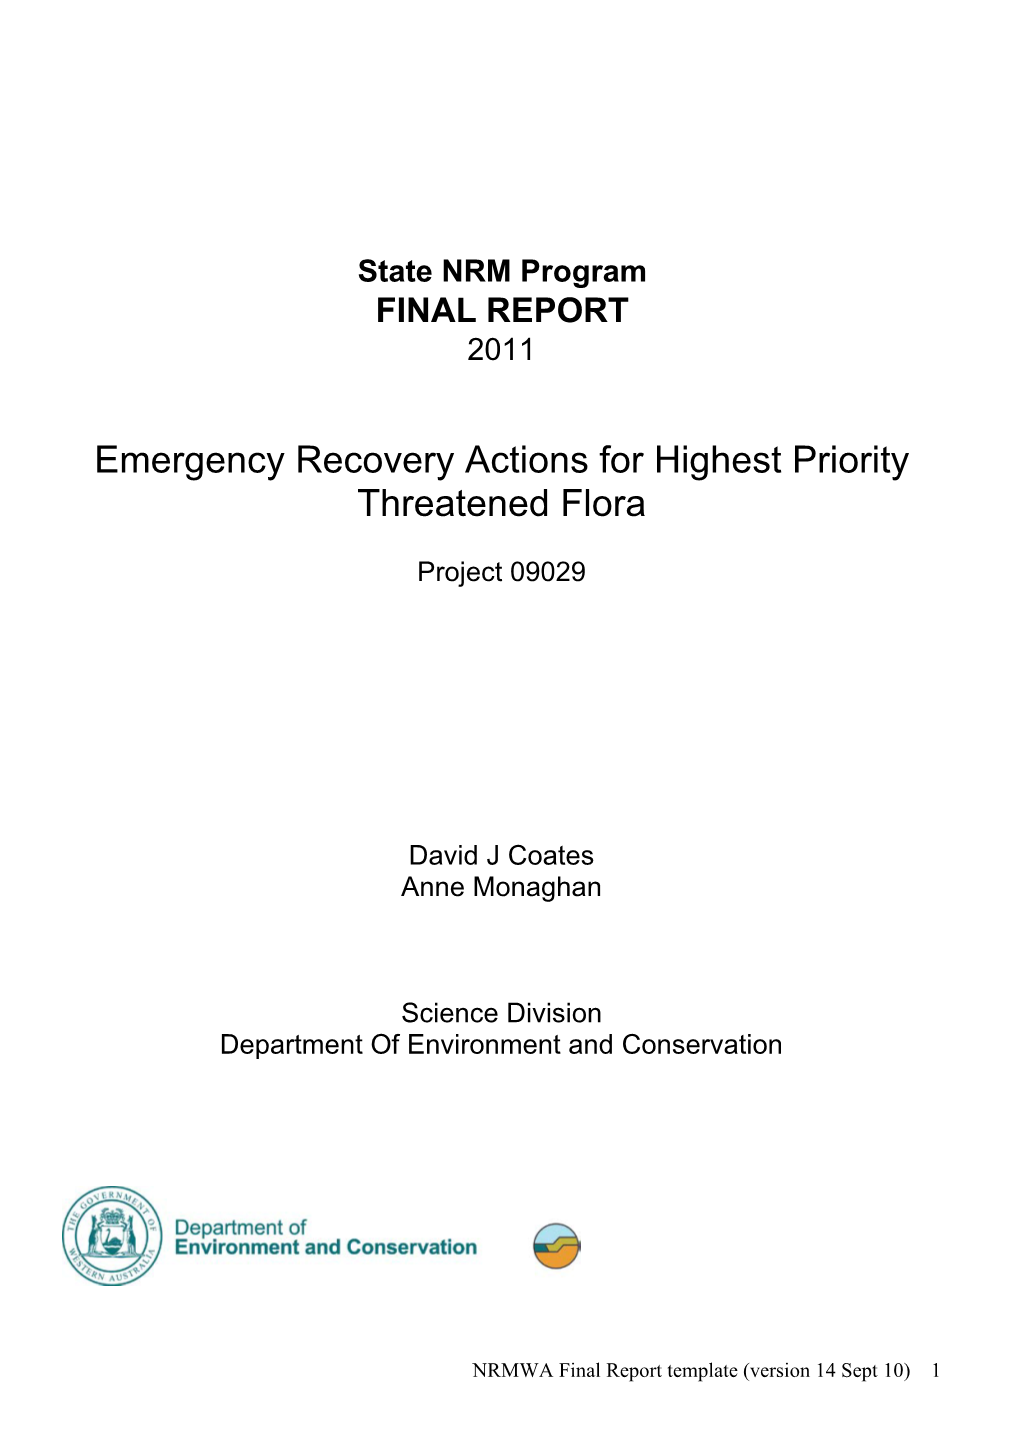 Emergency Recovery Actions for Highest Priority Threatened Flora